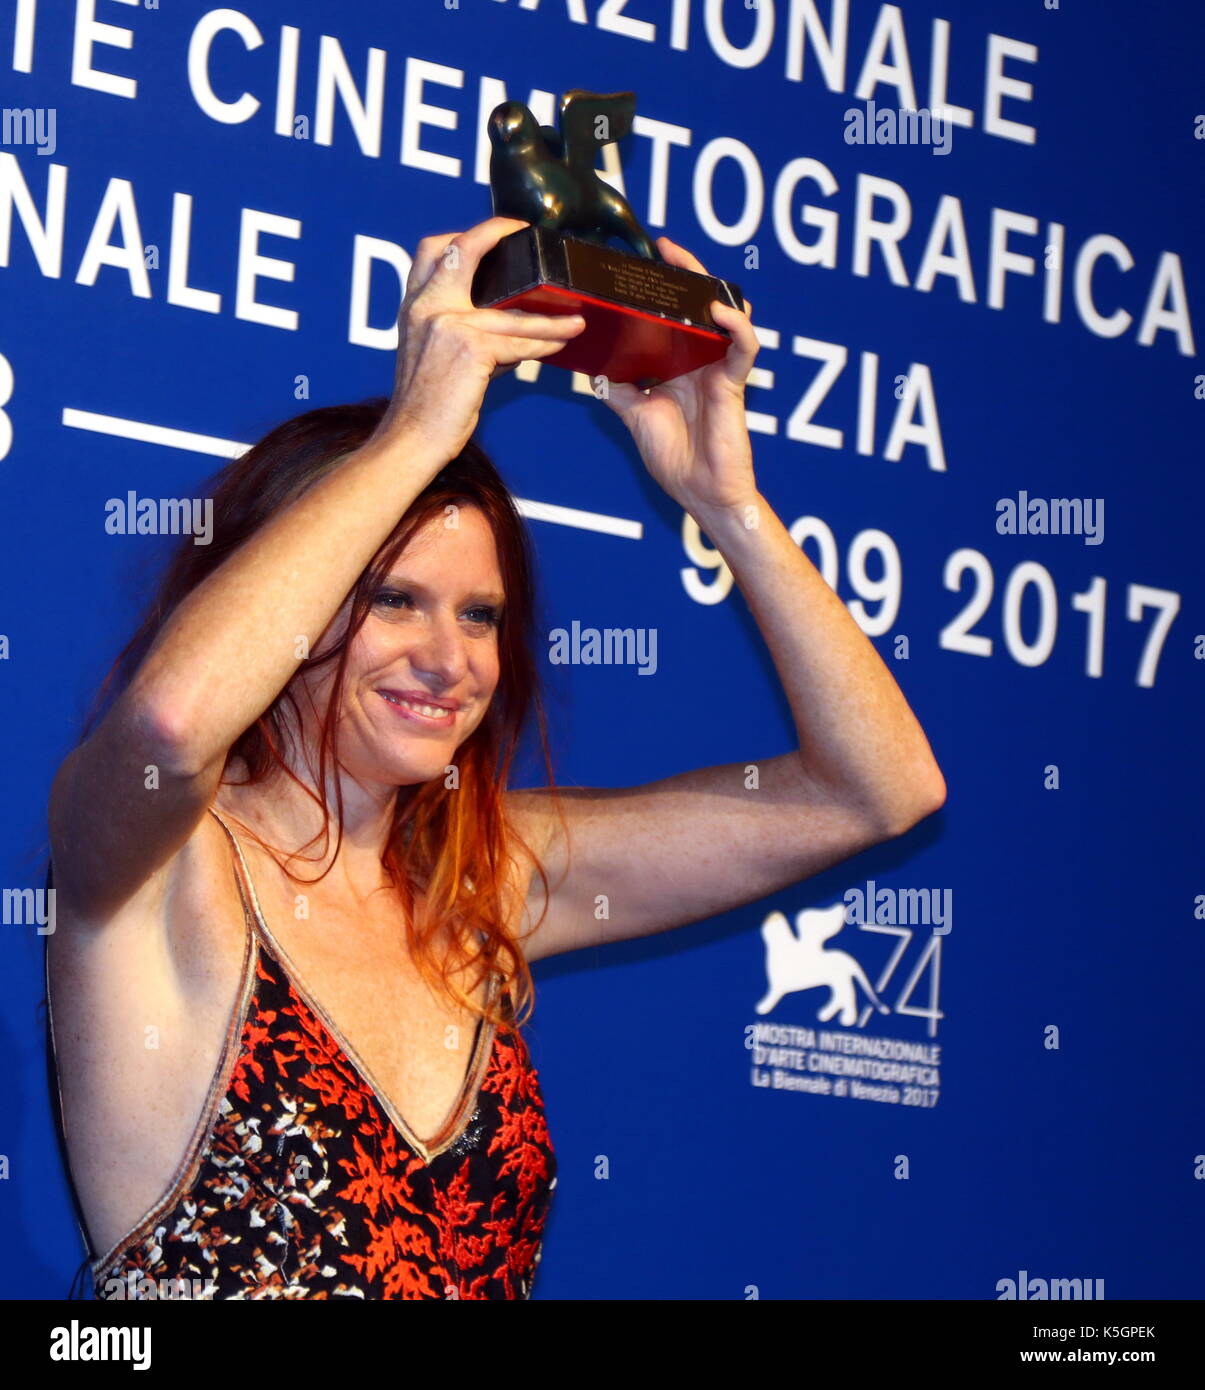 Venice, Italy. 9th September, 2017. Susanna Nicchiarelli poses with the Orizzonti Award for Best Film for 'Nico, 1988' at the Award Photocall during the 74th Venice International Film Festival at Lido of Venice on 9th September, 2017. Credit: Andrea Spinelli/Alamy Live News Stock Photo